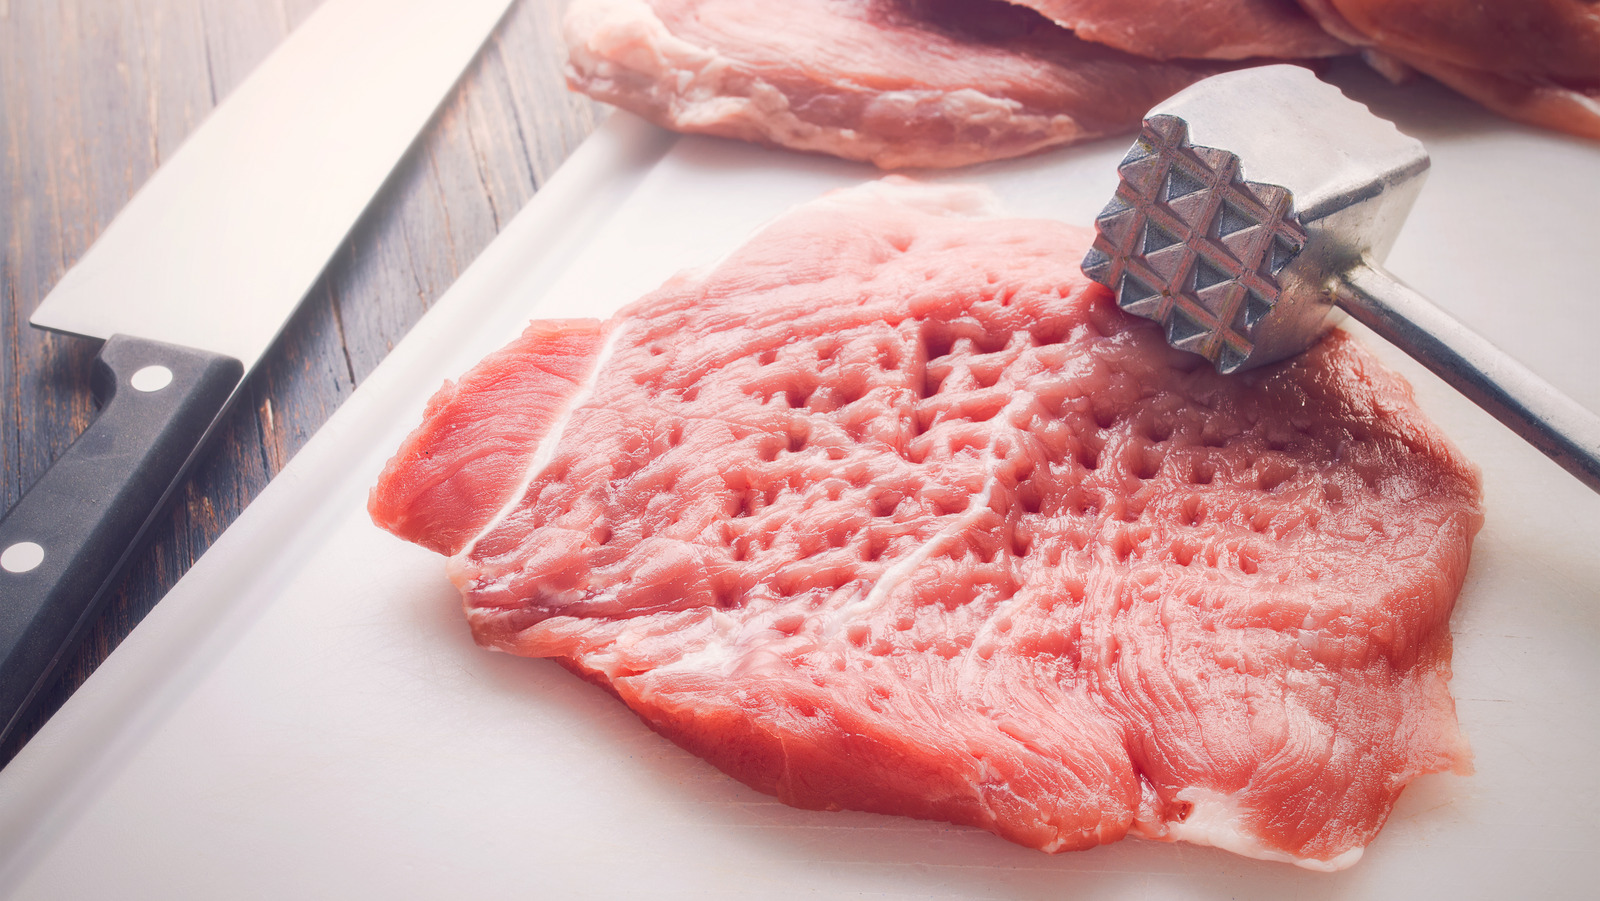 The 5 Best Meat Tenderizers, Tested by Allrecipes